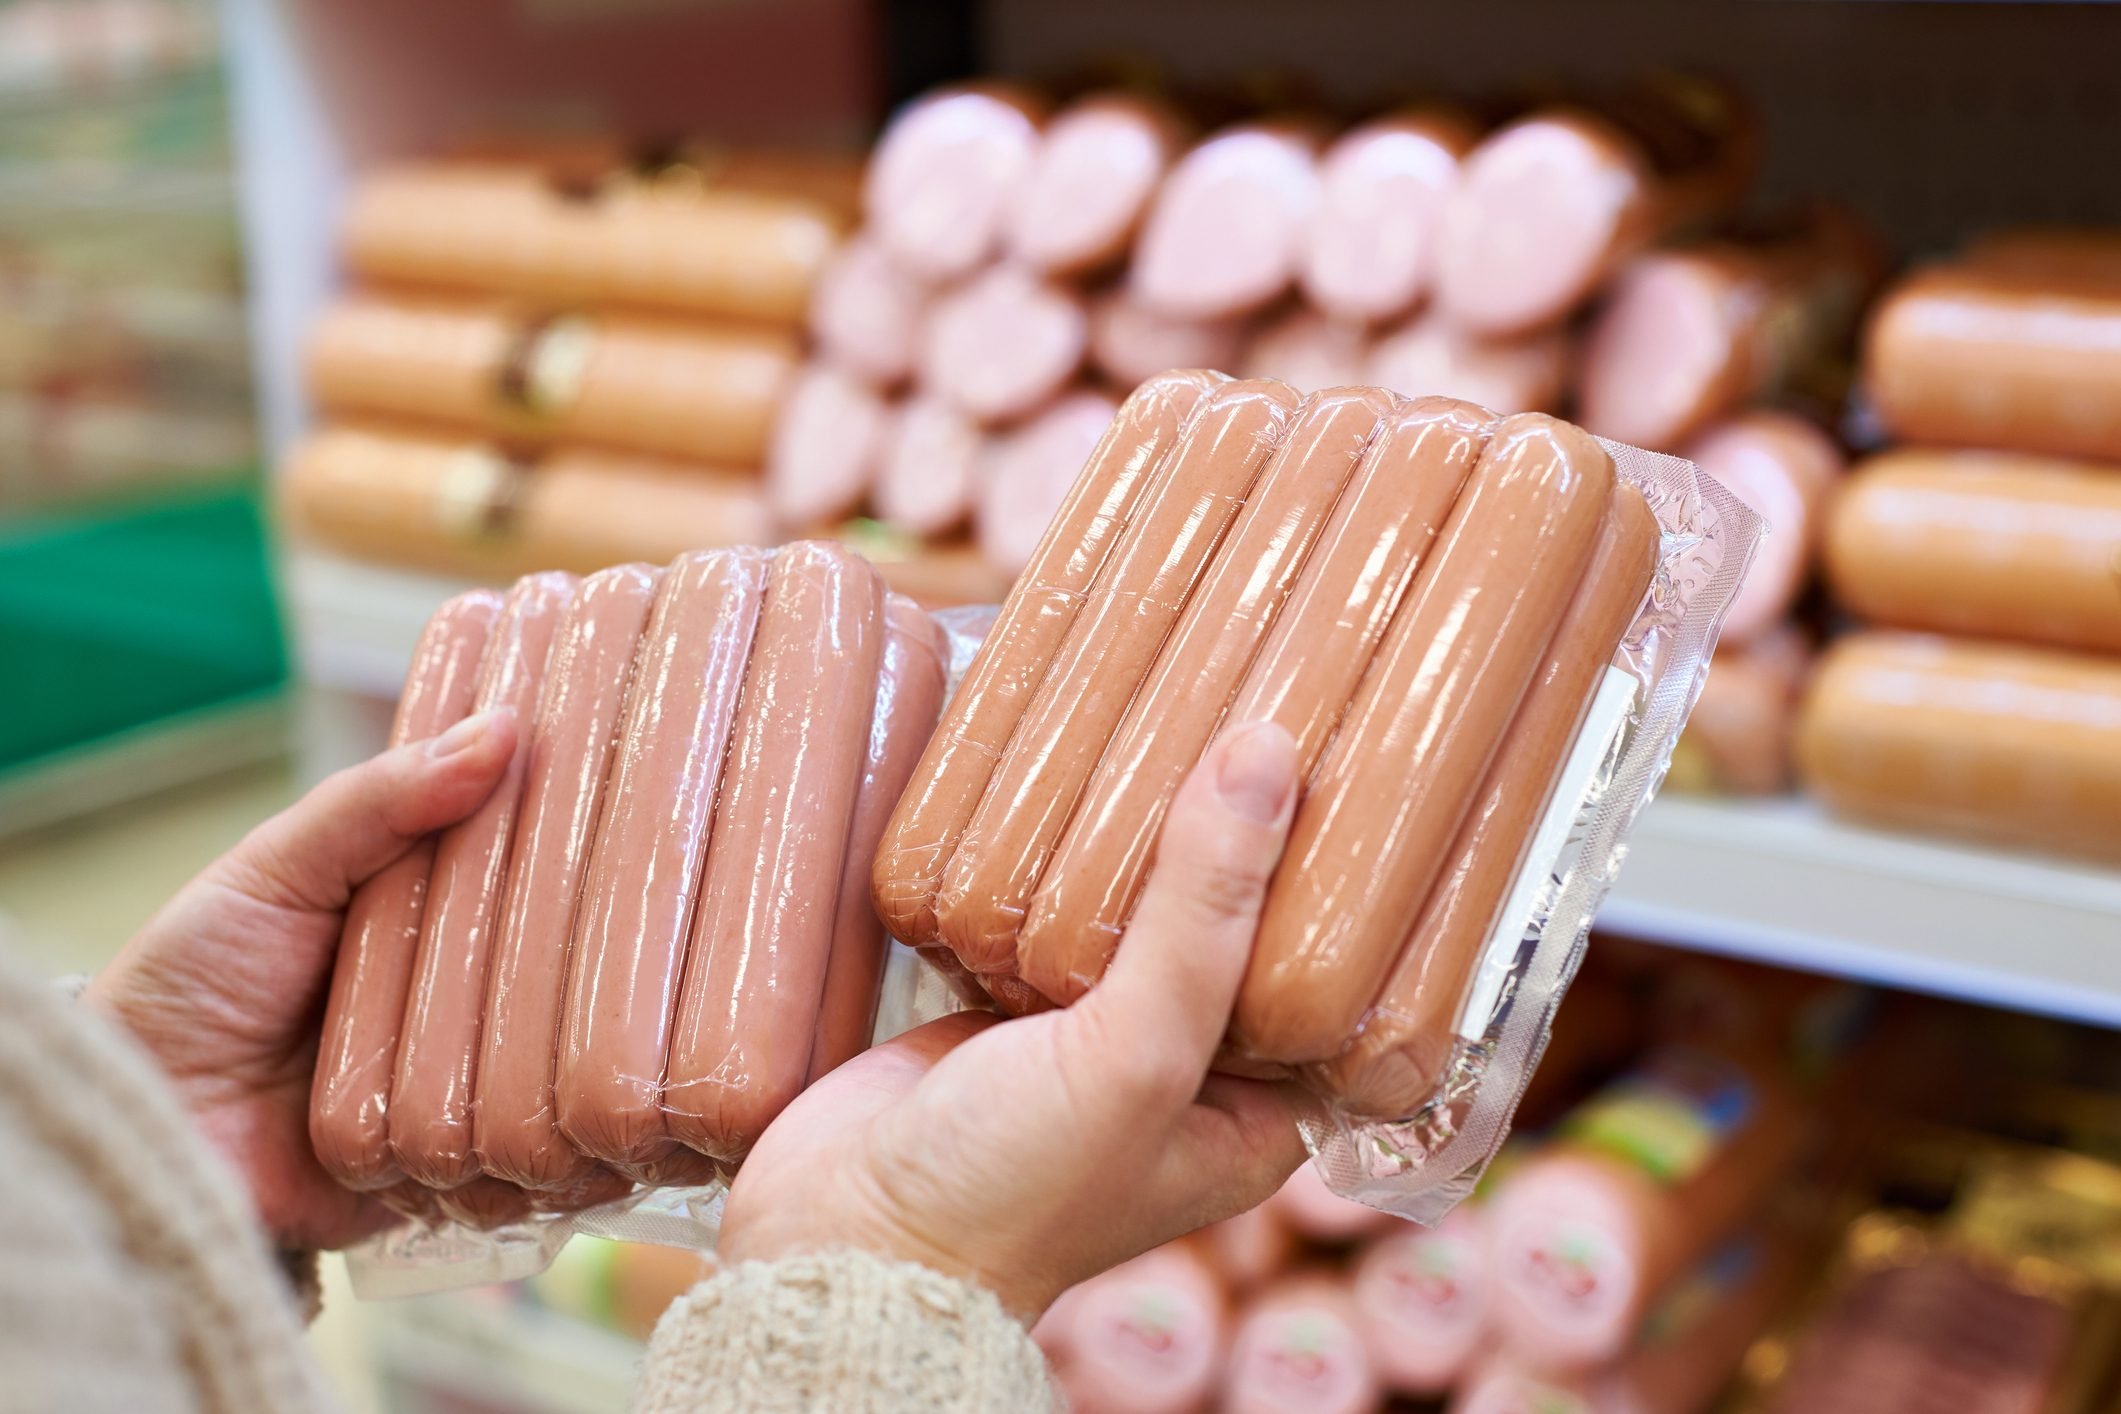 More Than 9,000 Pounds of Meat Recalled by Distributor in One US State